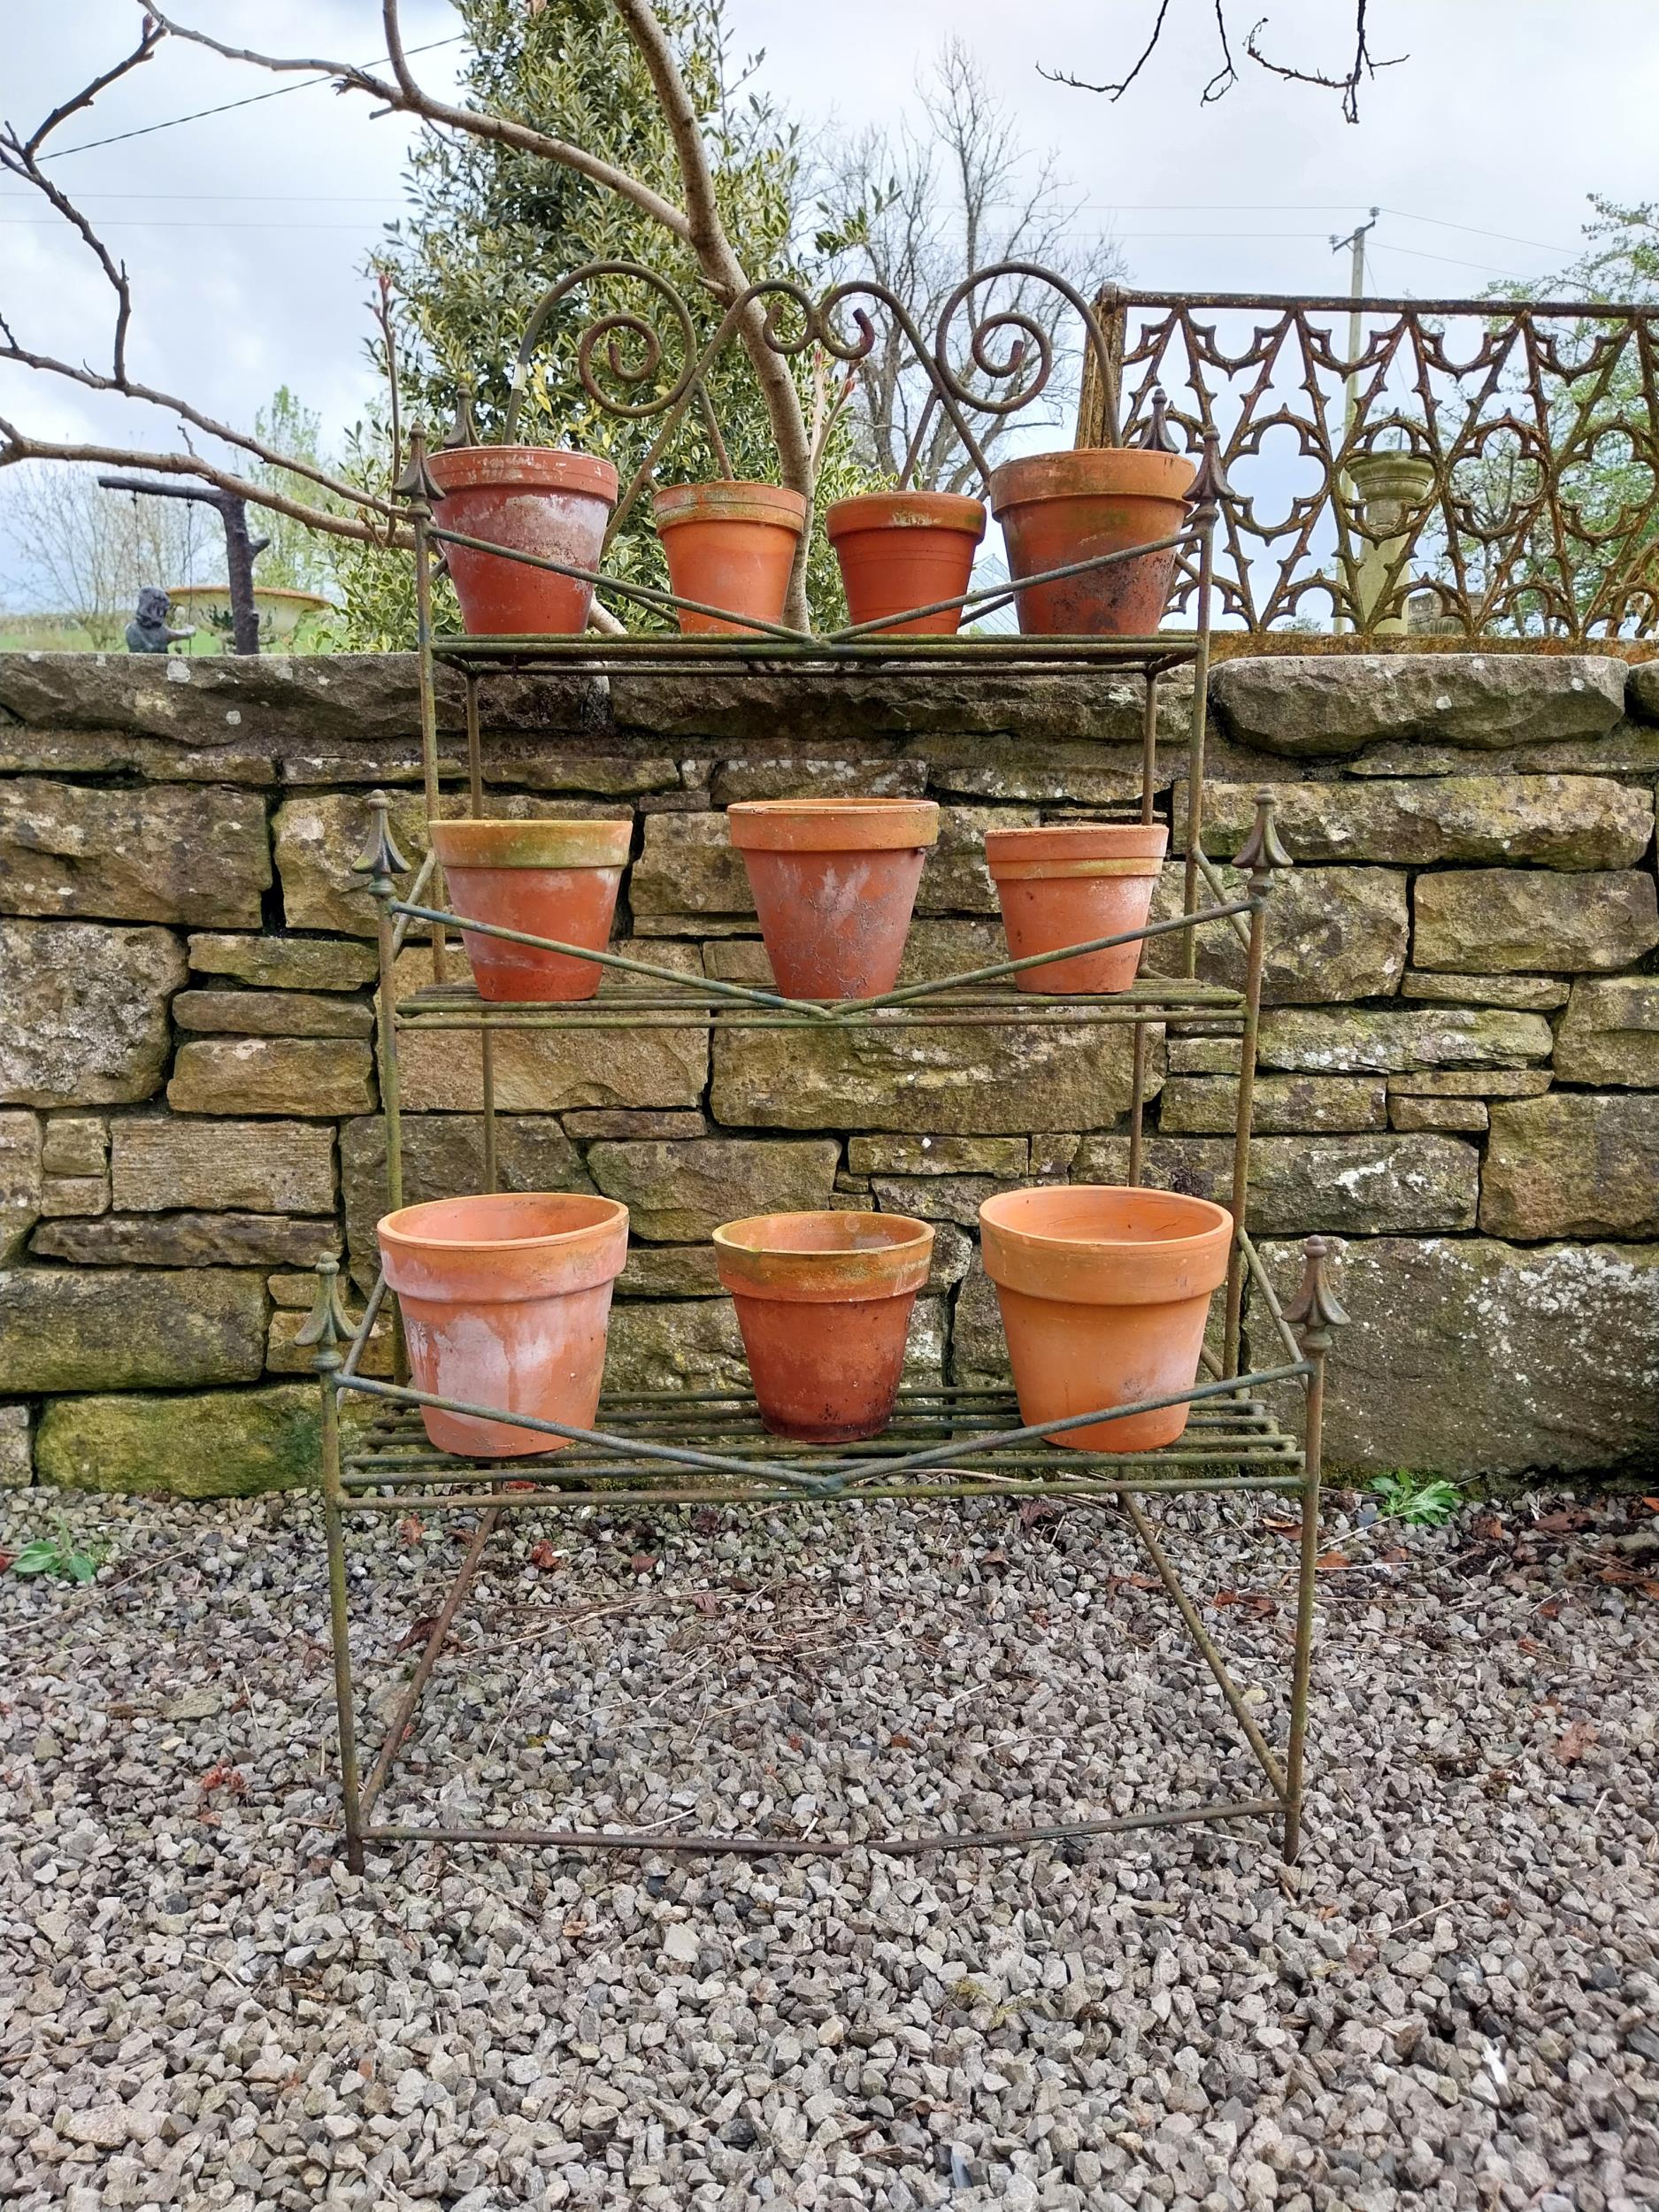 Early 20th C. wrought iron waterfall plant stand {127 cm H x 70 cm W x 64 cm D}.